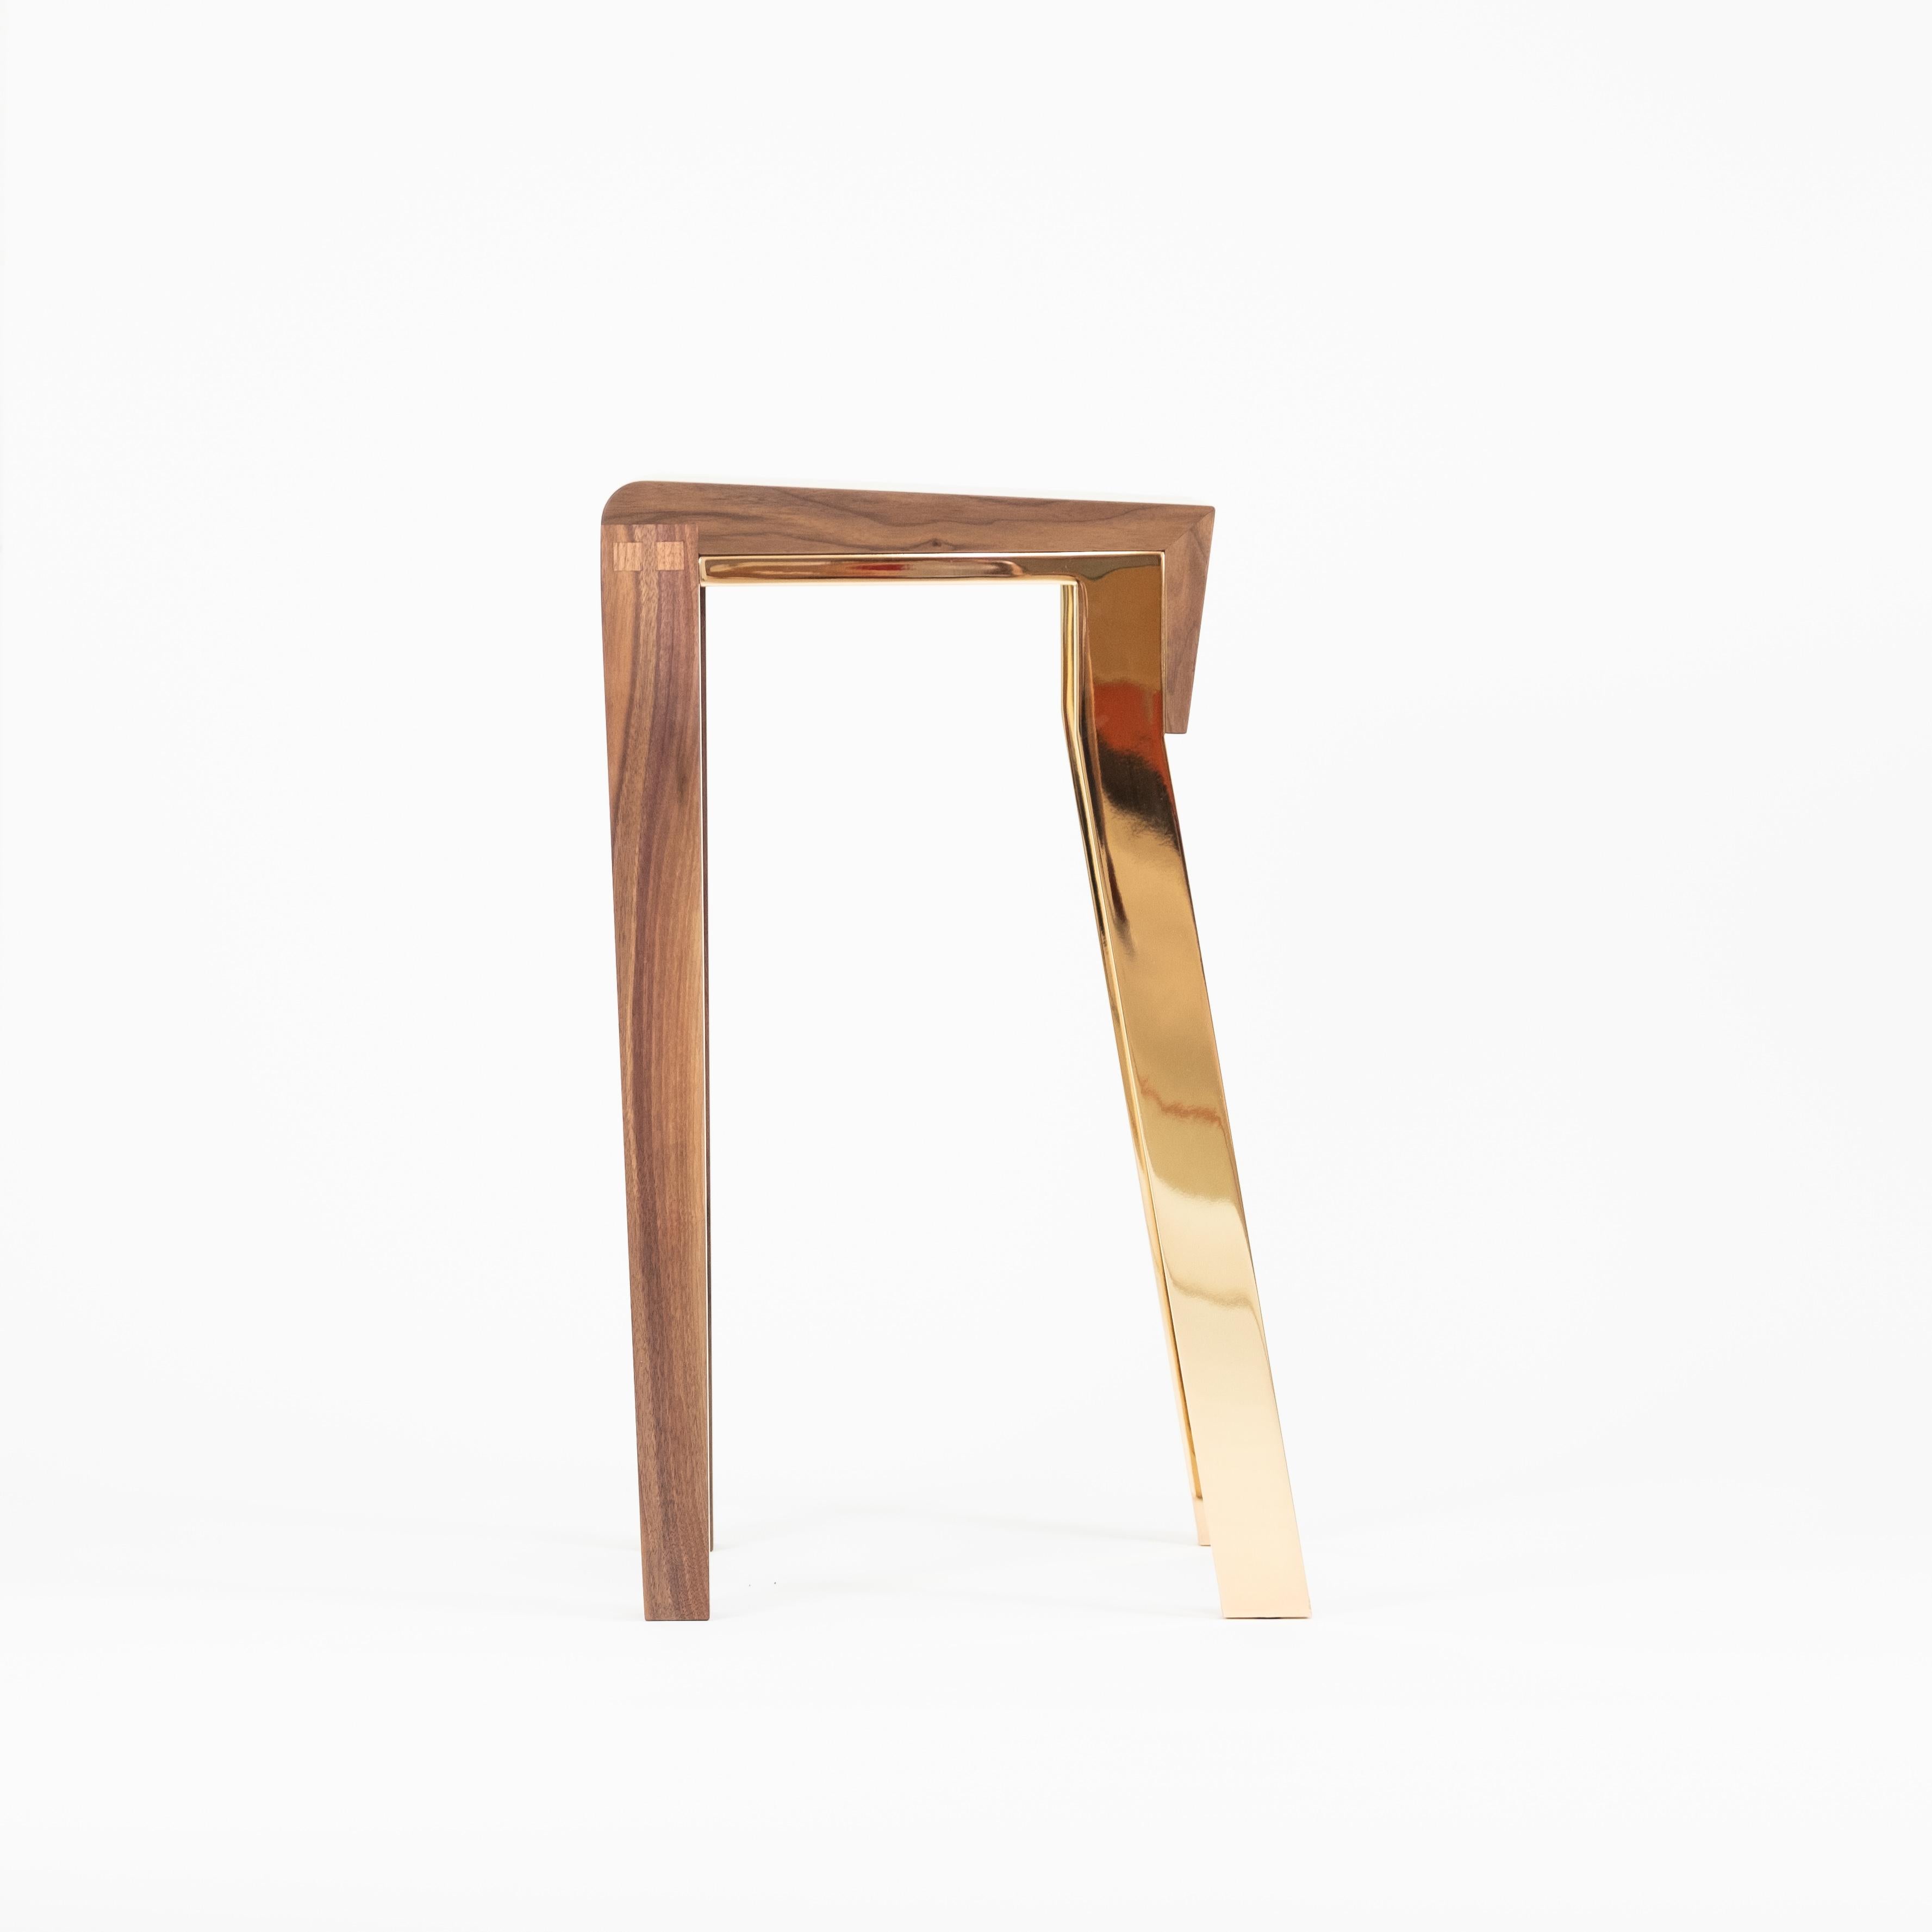 The 1.6 counter-height stool is a backless variant of the 1.5 dining and occasional chair. Many of the 1.5’s attributes apply: The stool is notable for its nuanced simplicity of form, carefully detailed Classic wood joinery and precision steel